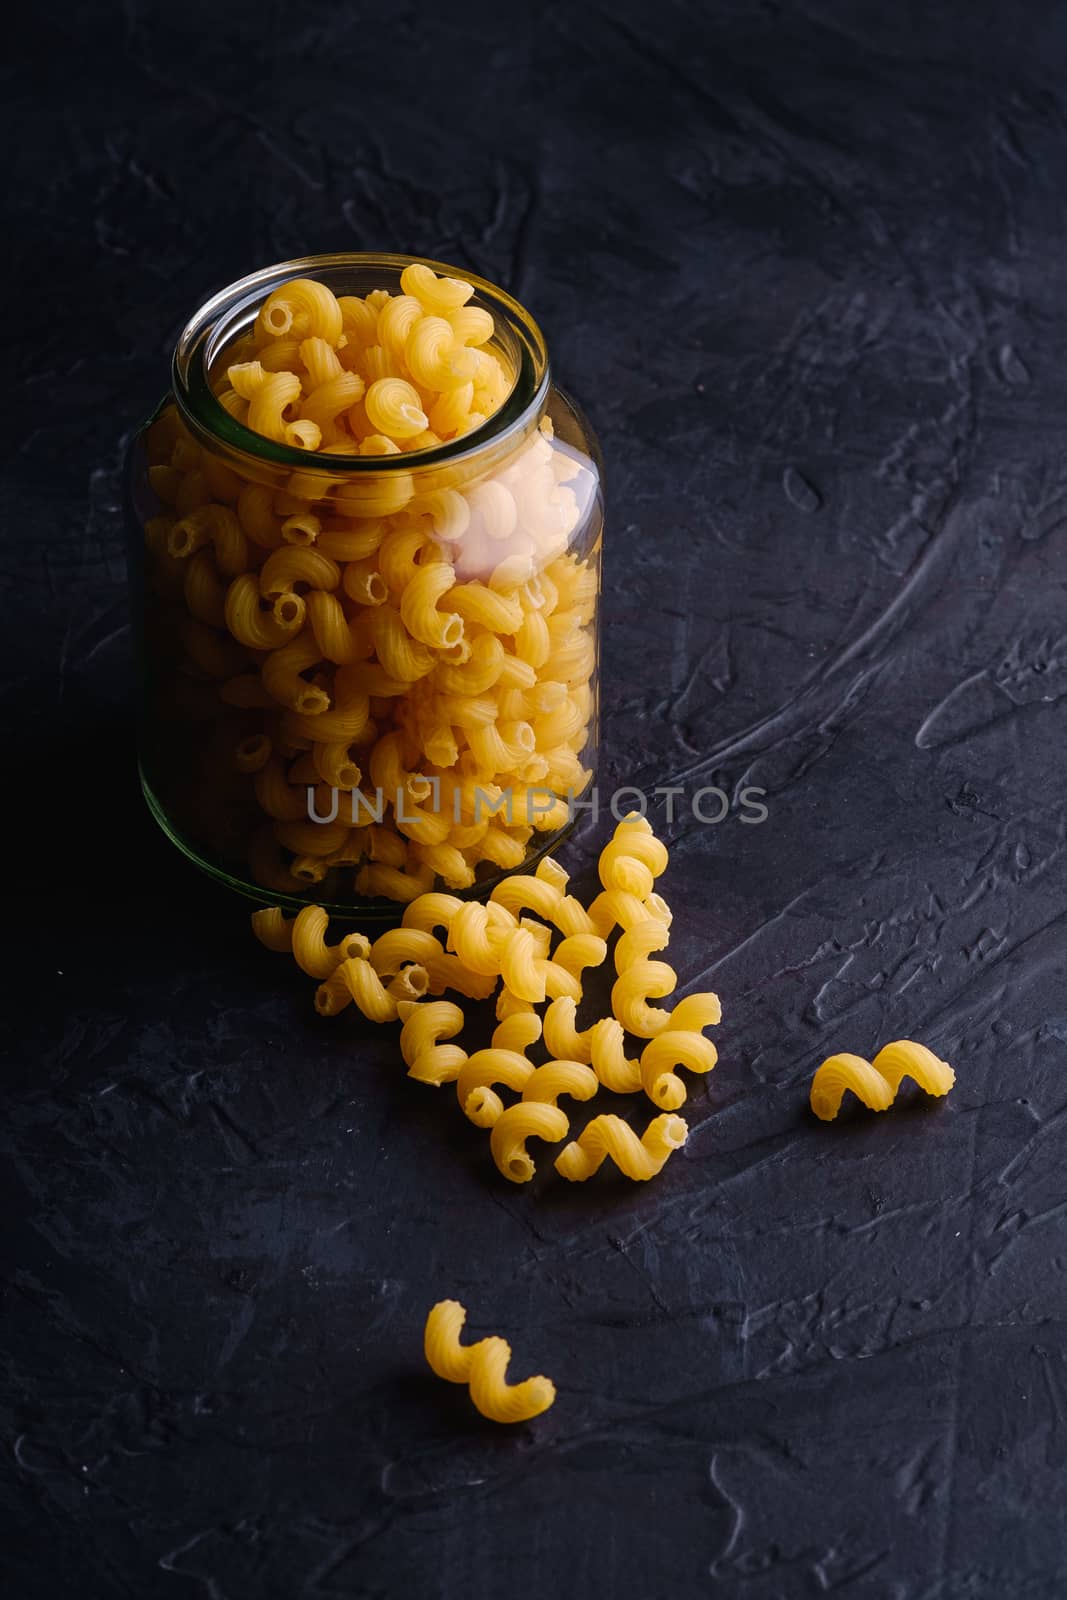 One glass jar with cavatappi uncooked golden wheat curly pasta near to scattered macaroni on textured dark black background, angle view